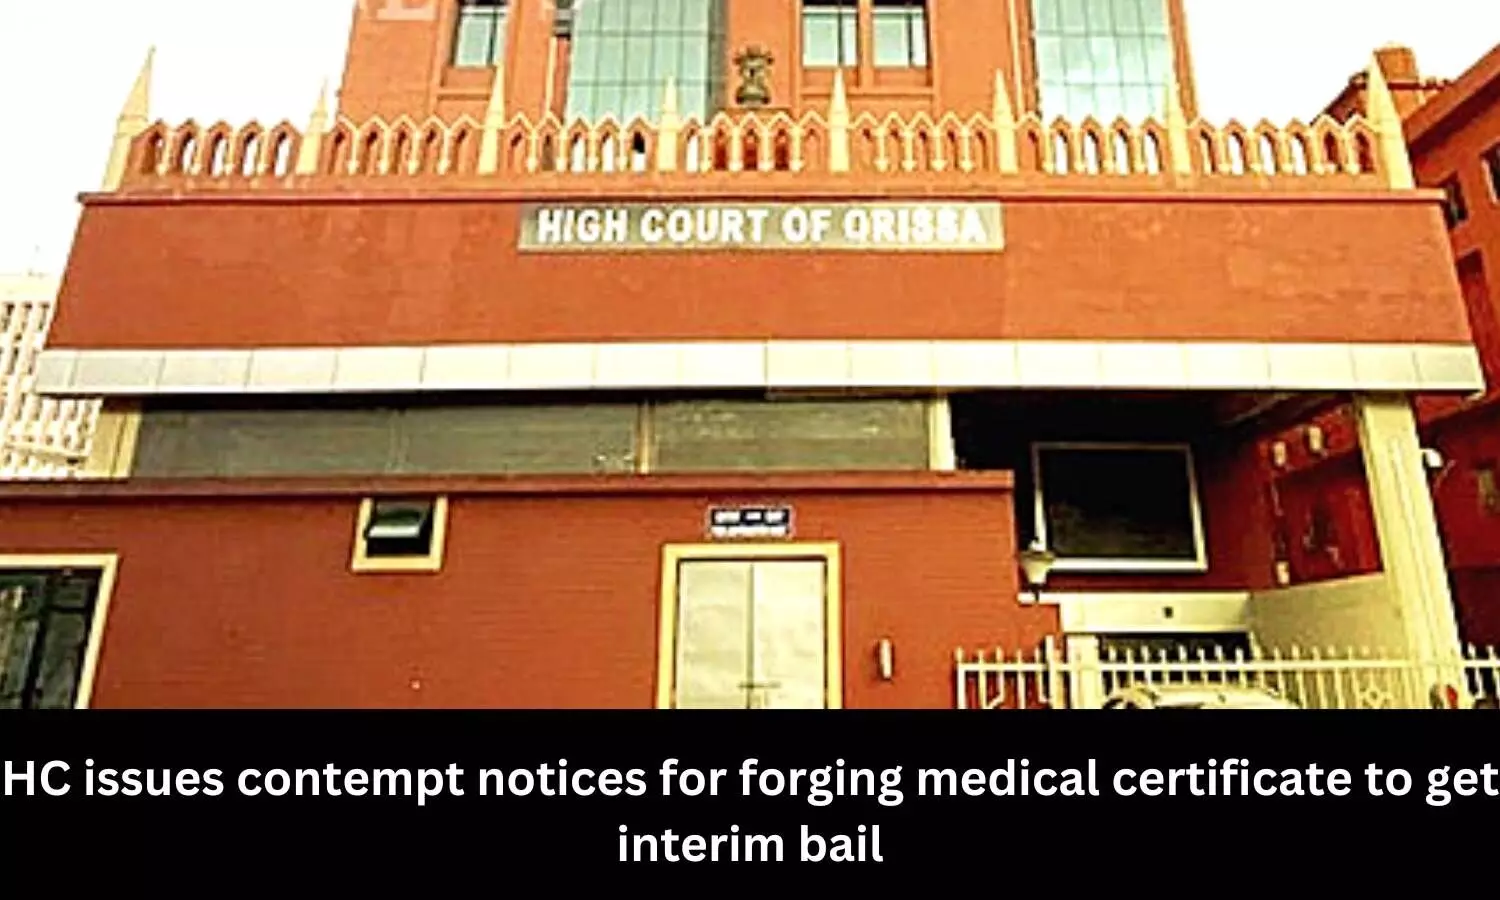 Orissa High Court issues contempt notices for forging medical certificate to get interim bail